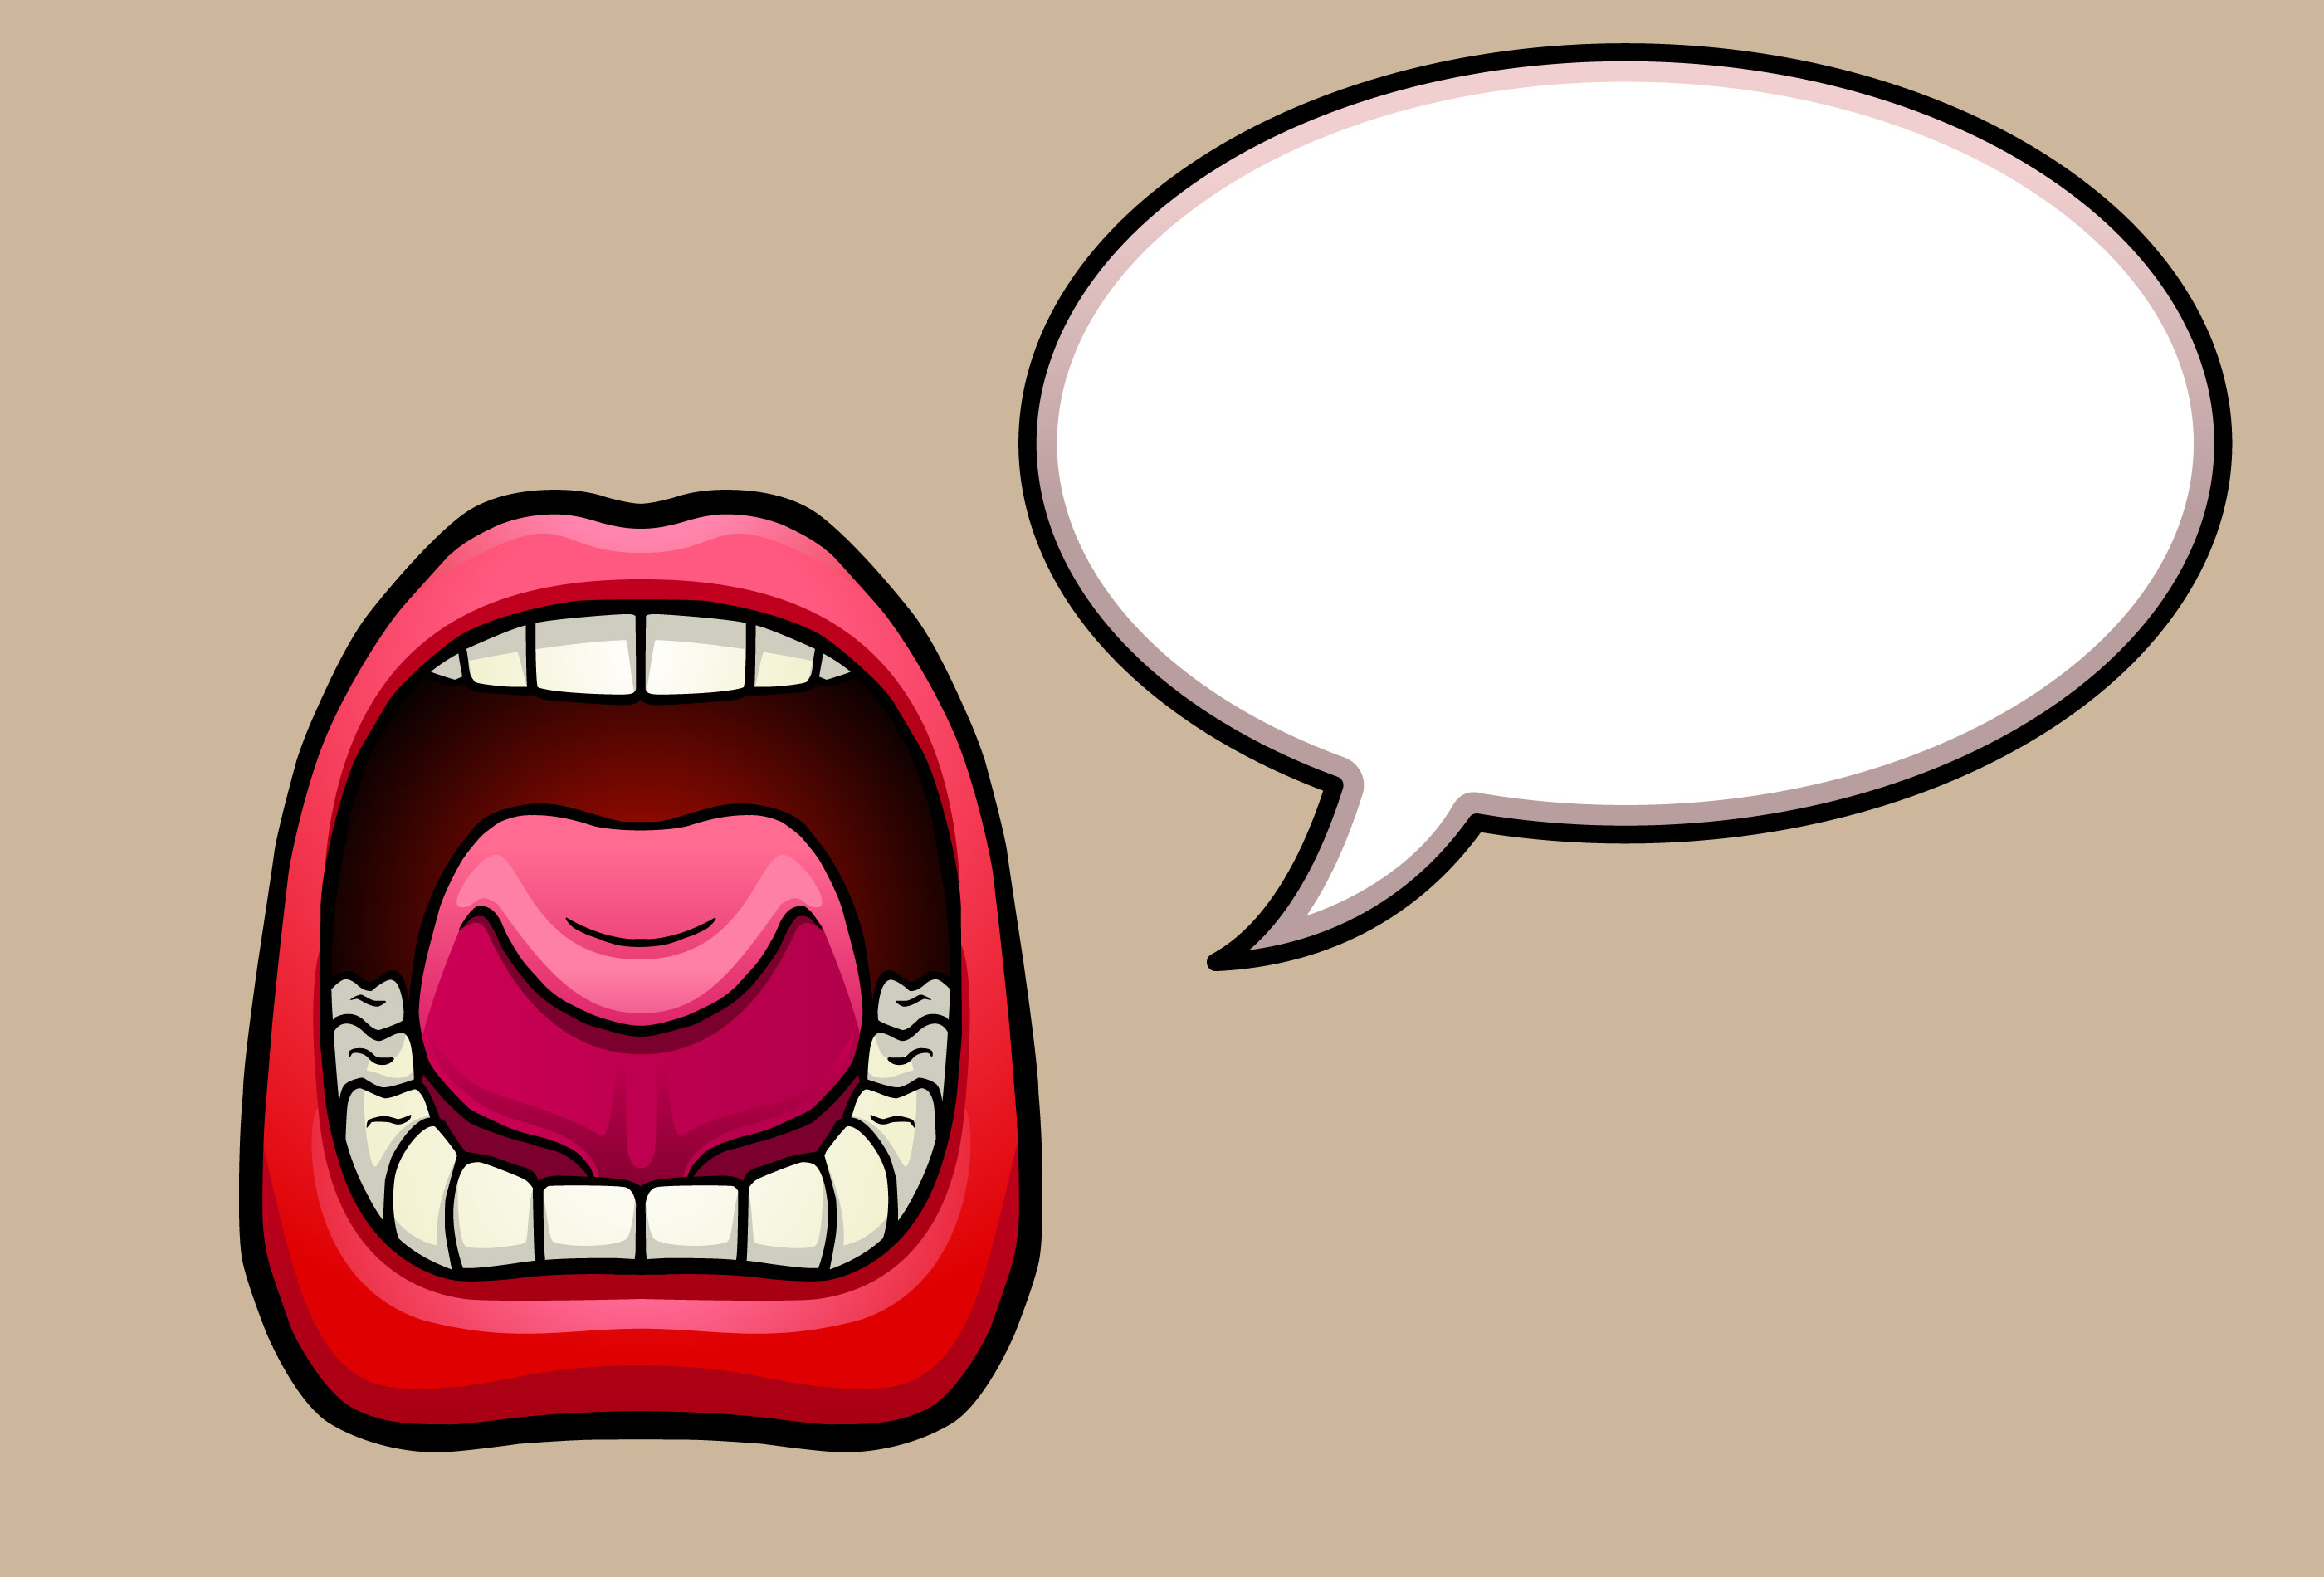 Talking Mouth Animation Gif - ClipArt Best